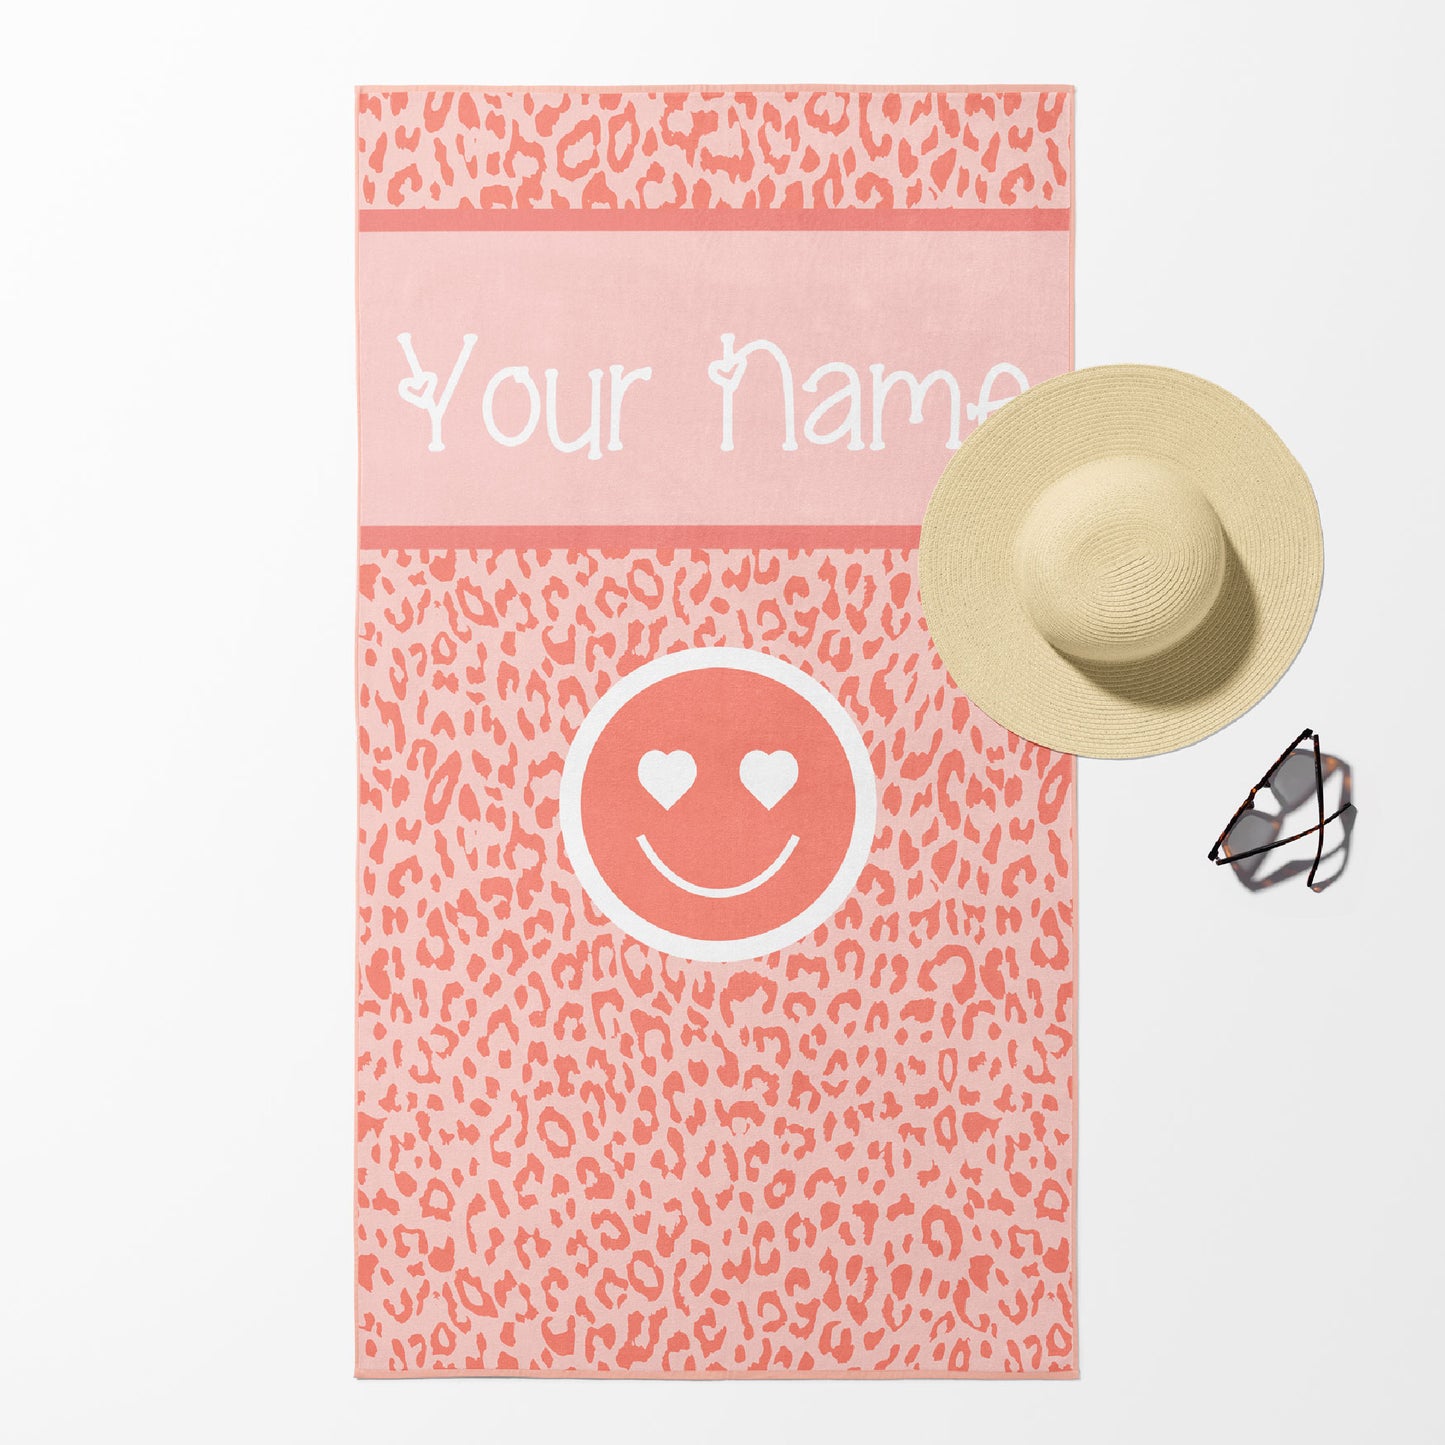 Beach towel in peach leopard print with smiley face and customizable text.